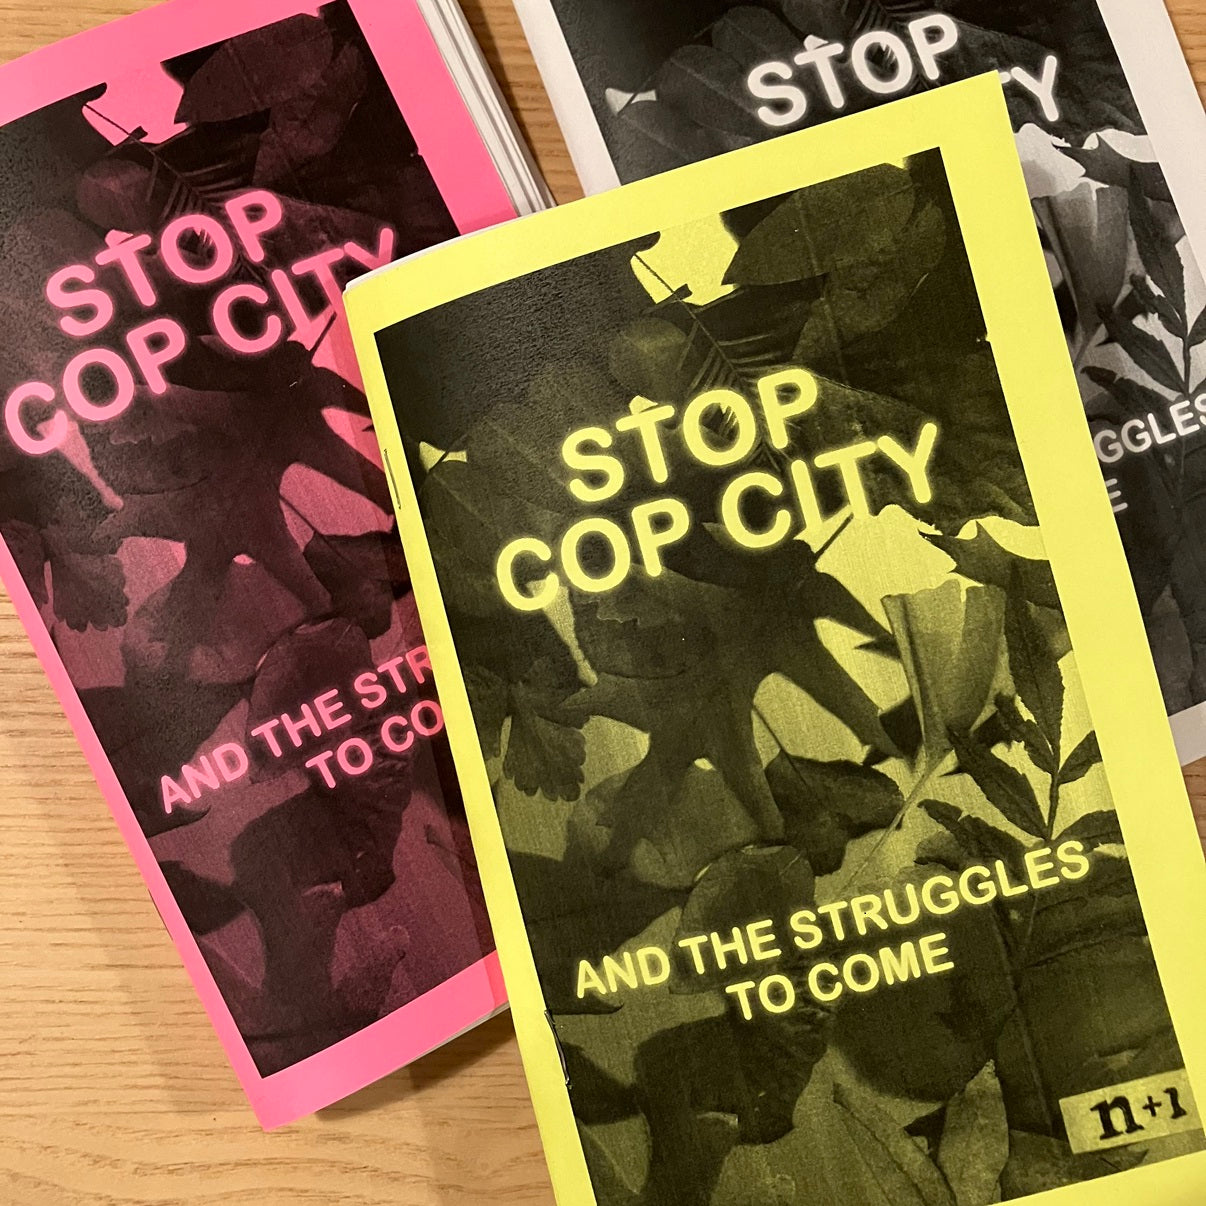 Stop Cop City and the Struggles to Come